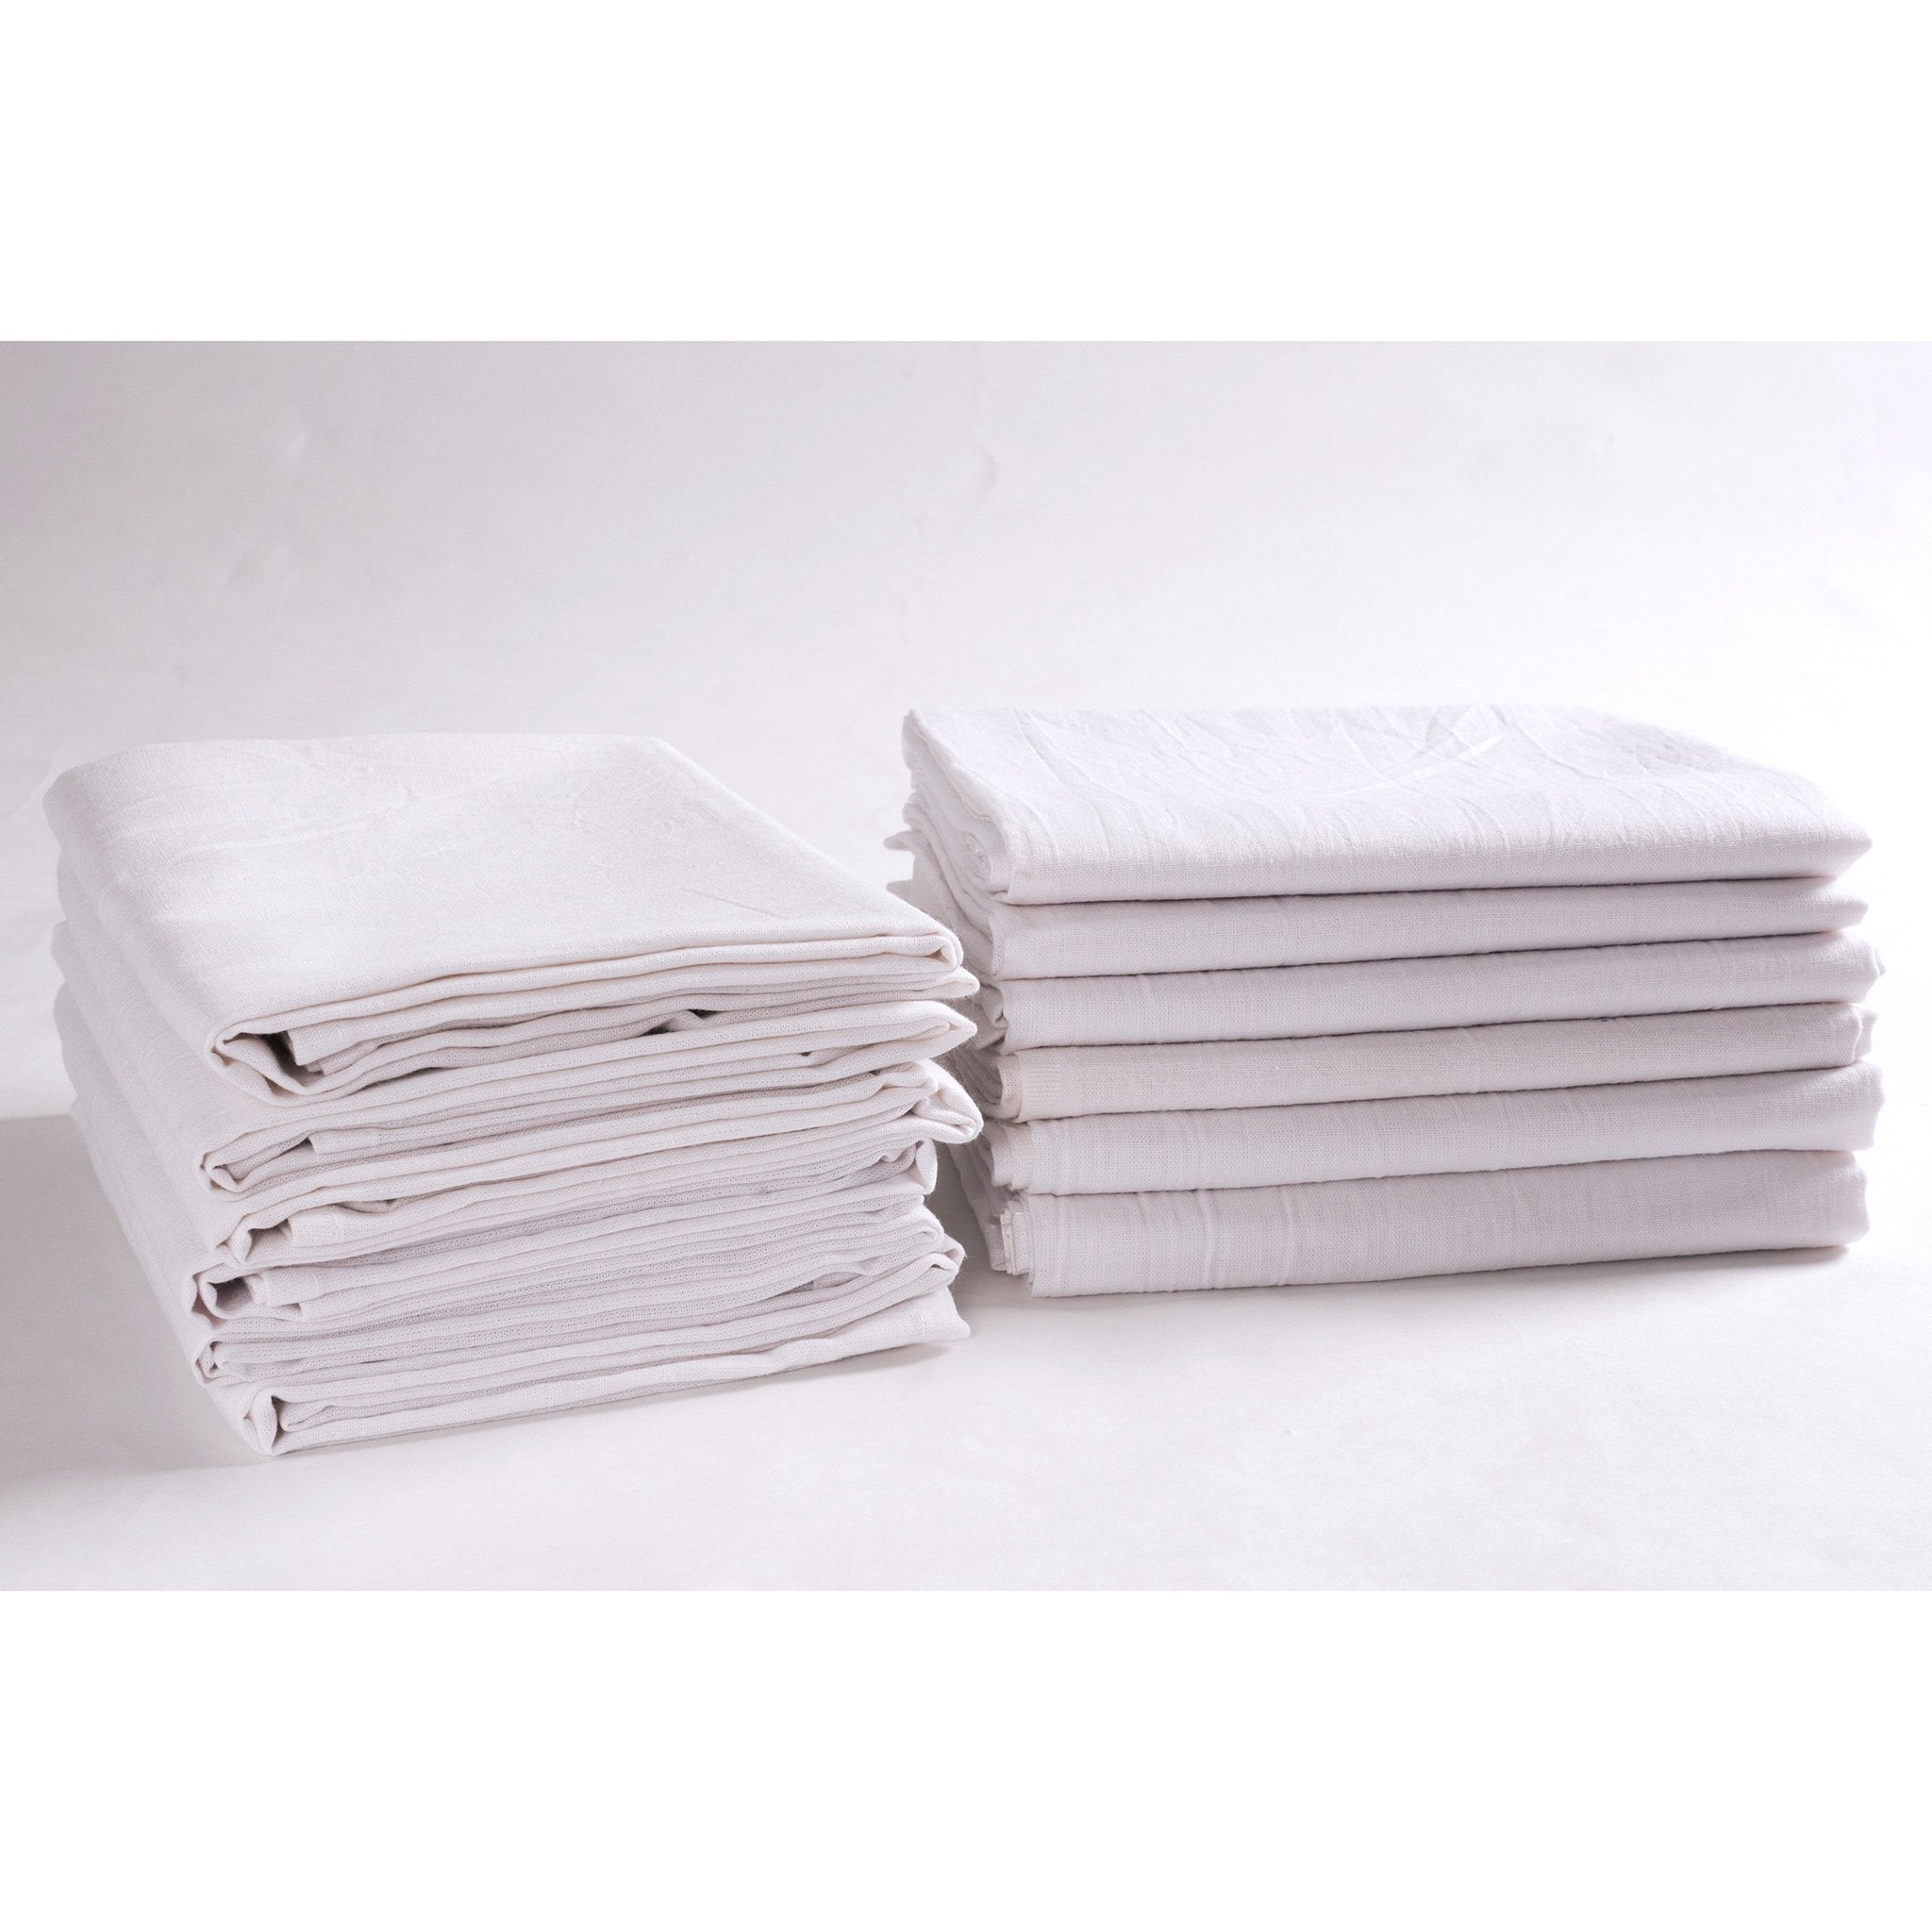 Small Flour Sack Towels, Cloth Napkins, 12x12, 100% Cotton, Set of 4 —  Mary's Kitchen Towels